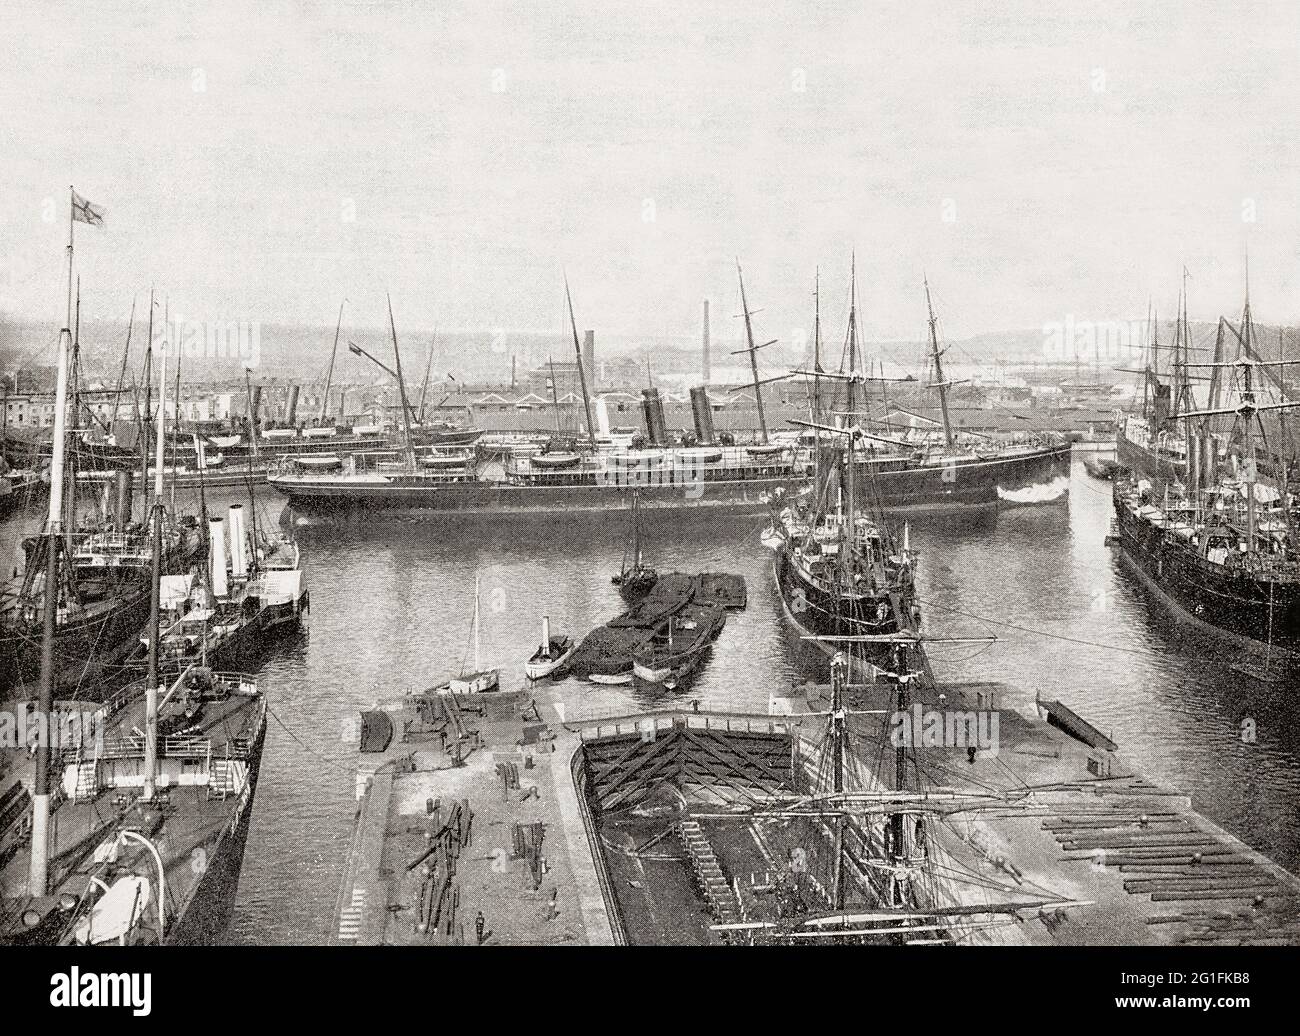 A late 19th century view of the busy docks in the Port of Southampton, a passenger and cargo port in the central part of the south coast of England. From the Middle Ages to the end of the 20th century, it was a centre for naval shipbuilding and a departure point for soldiers going to war. The opening of the railway to London in 1840 gave a boost to the port and ships  arrived in numbers that overwhelmed the town's quays and wharves, and the first dock was inaugurated in 1843 and several more until 1890 when Queen Victoria opened the Empress Dock, larger and deeper than earlier ones. Stock Photo